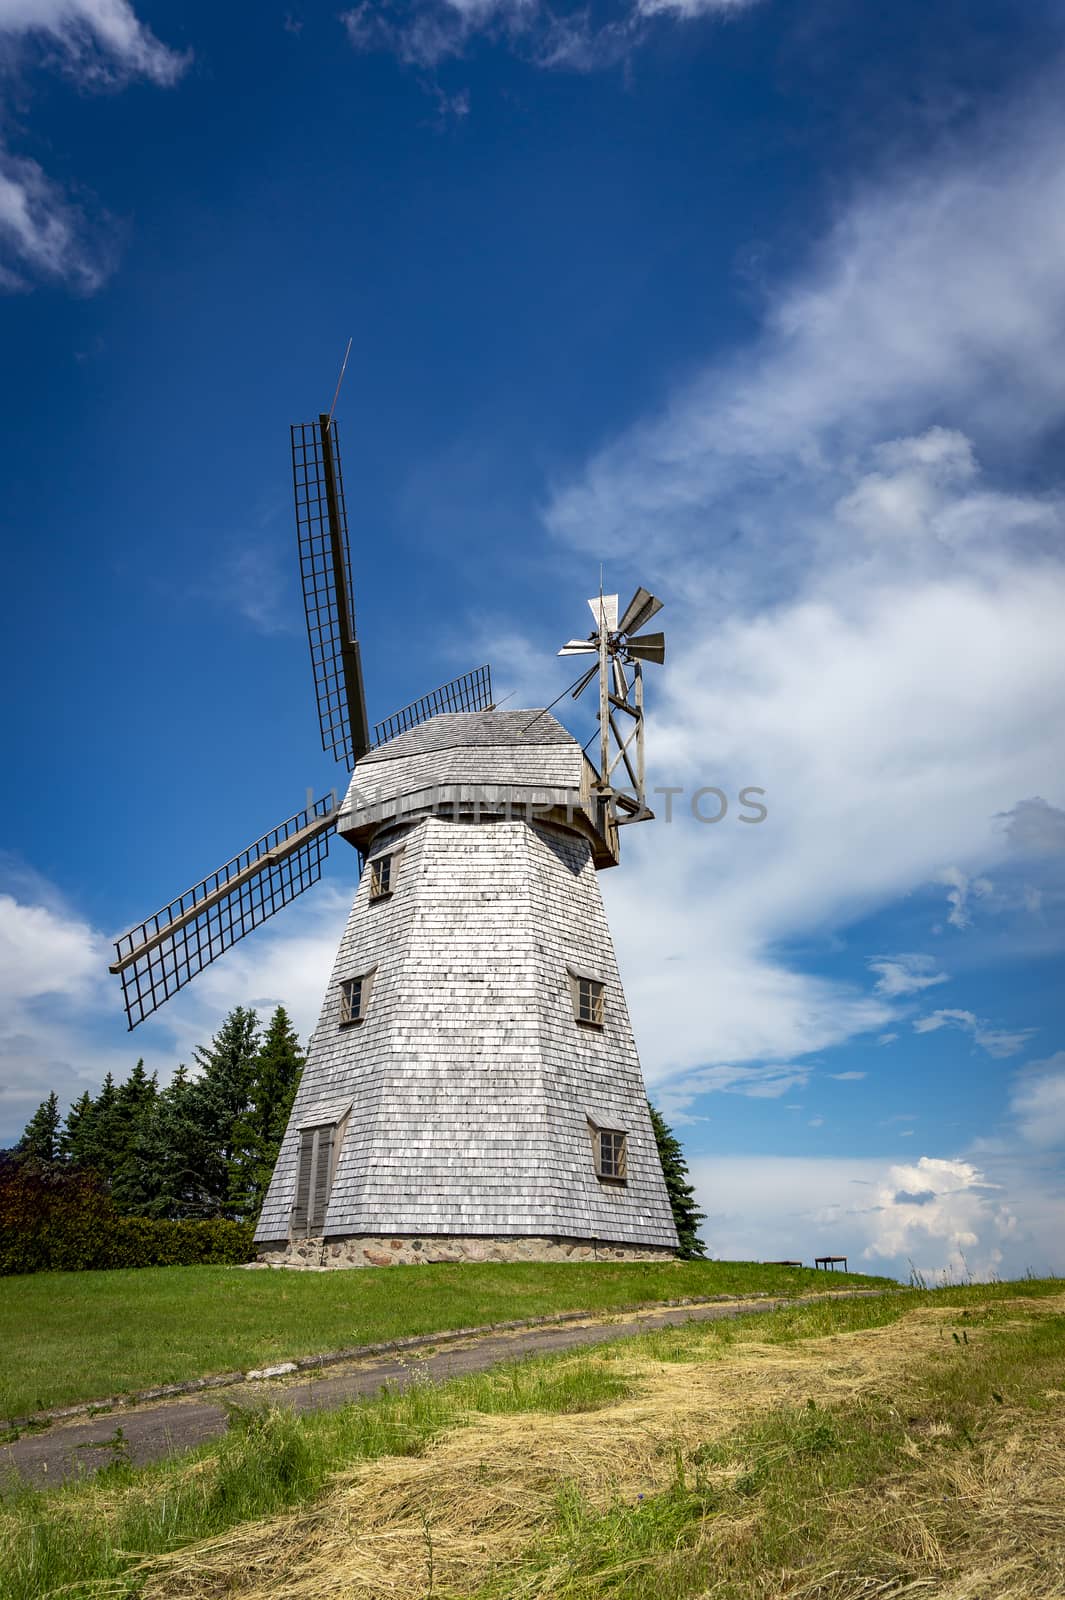 Old windmill in a country landscape by NetPix